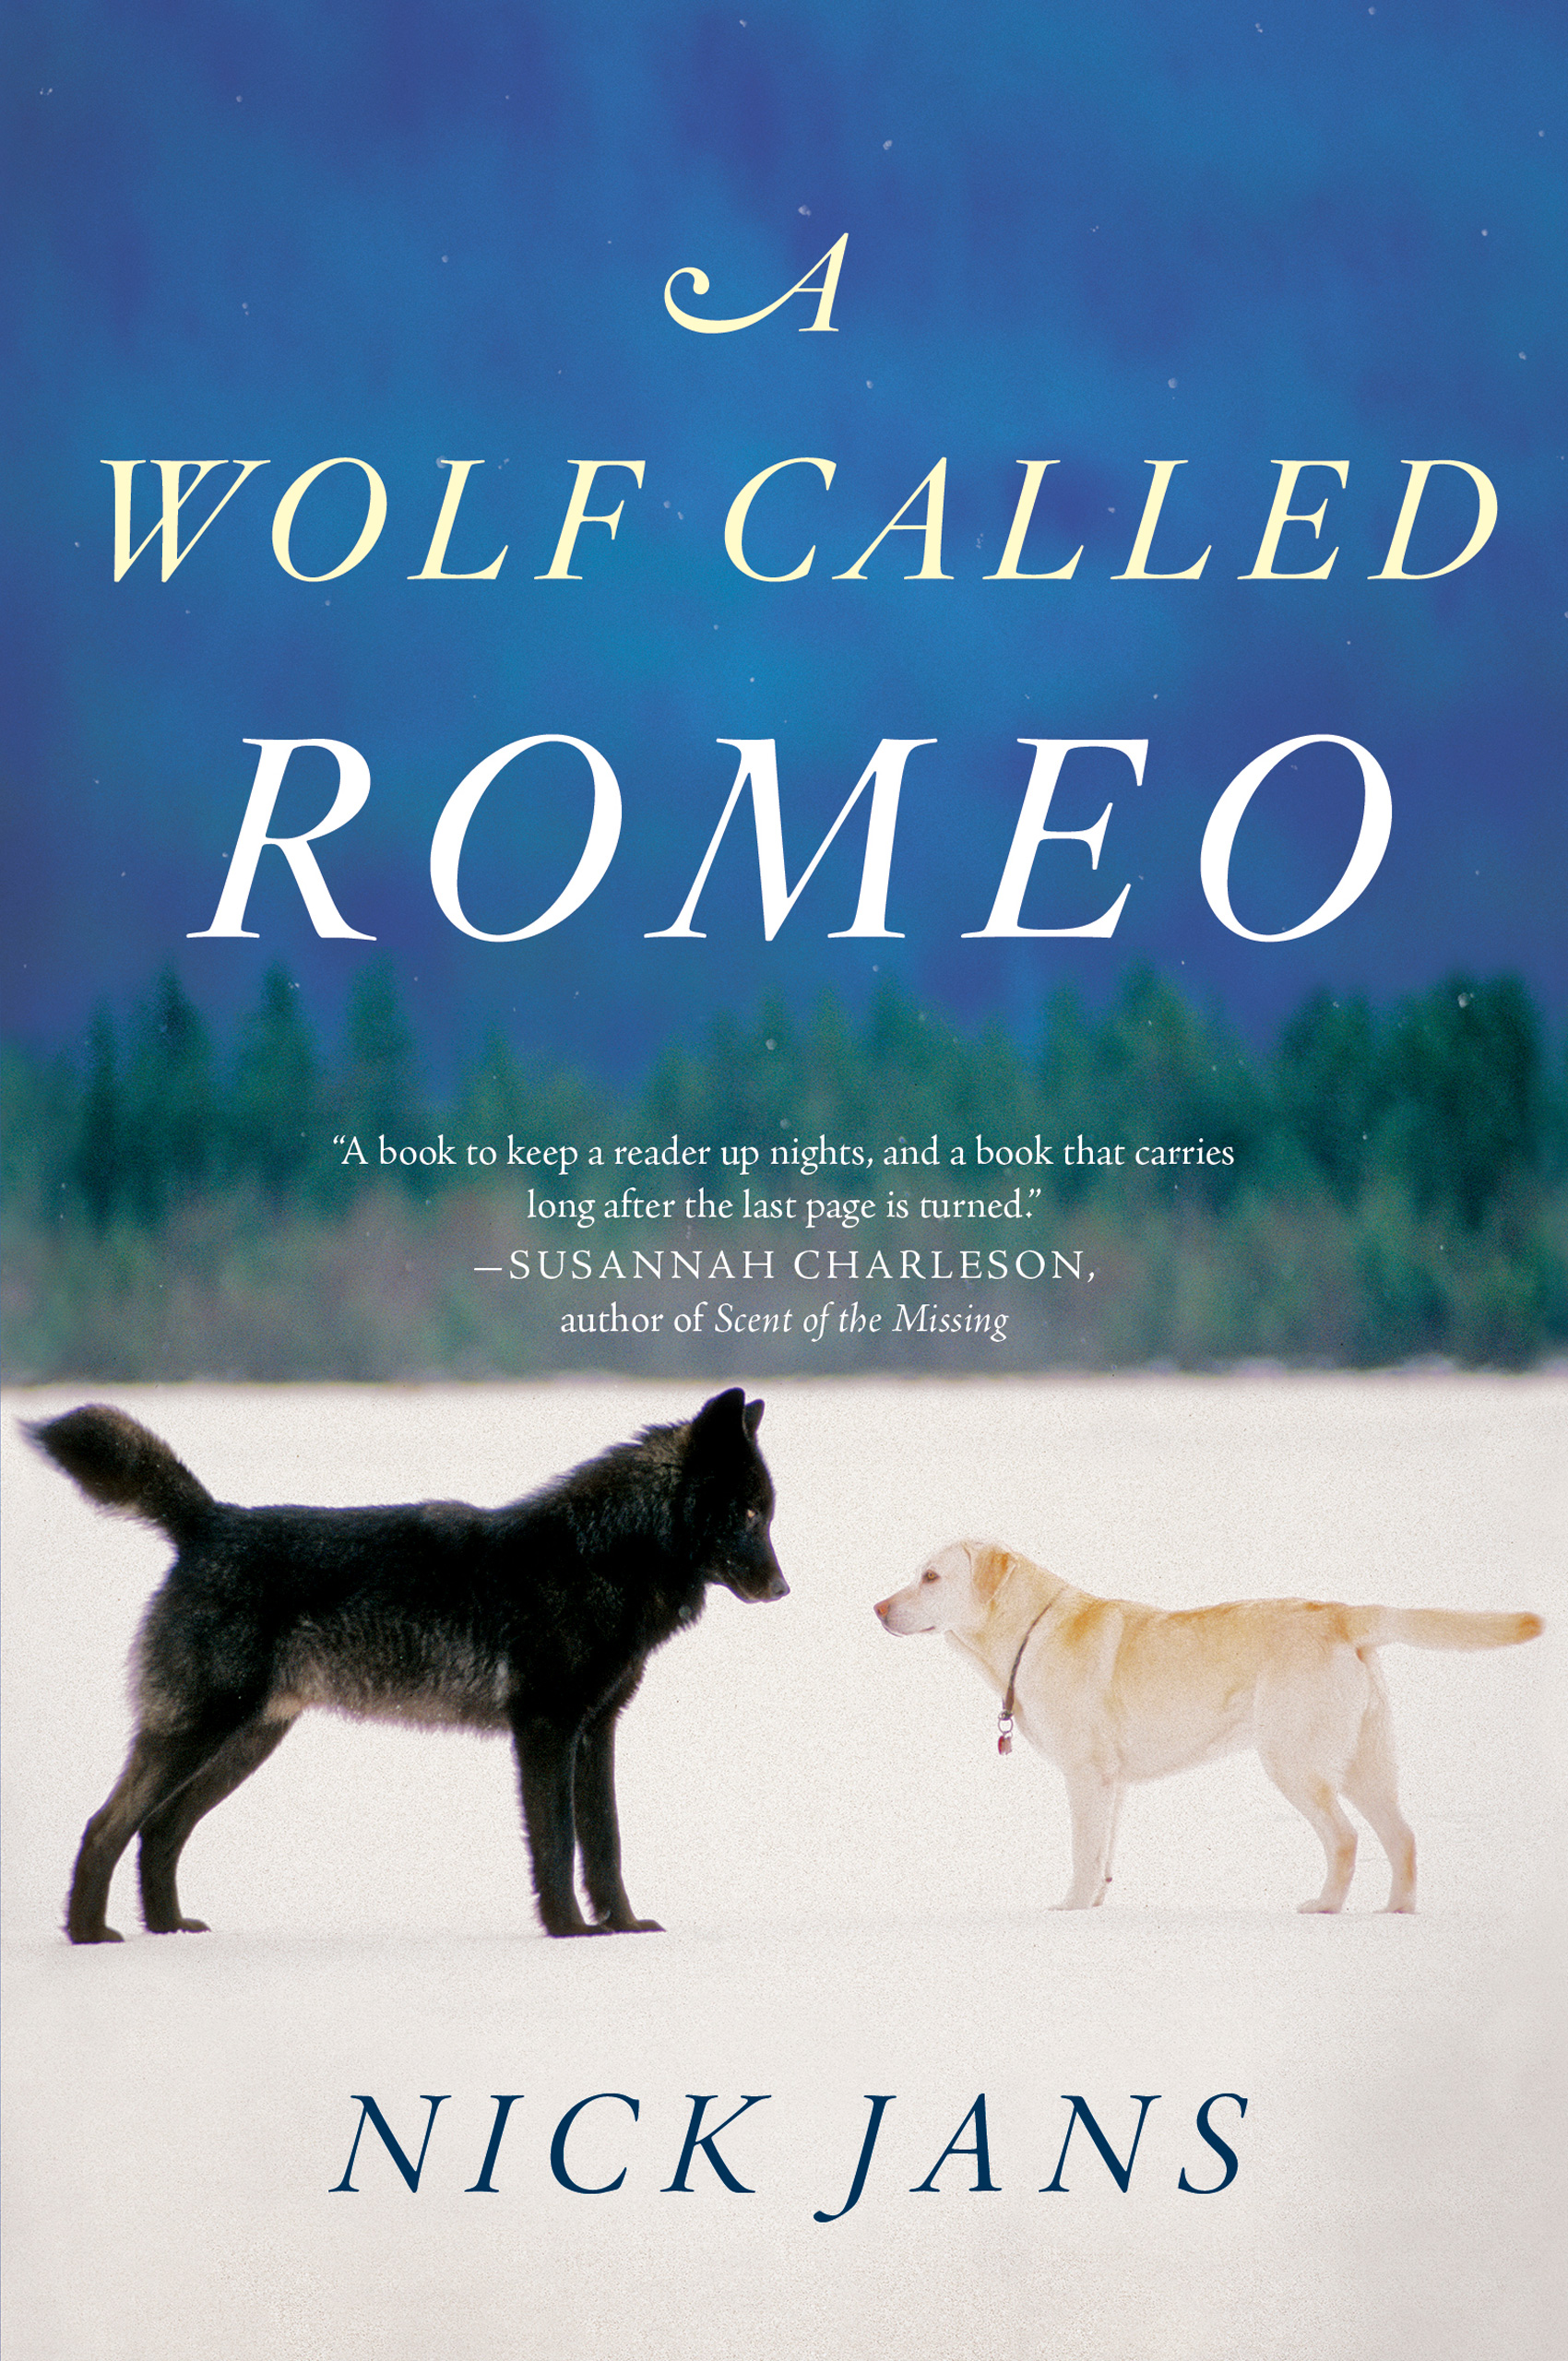 A wolf called Romeo